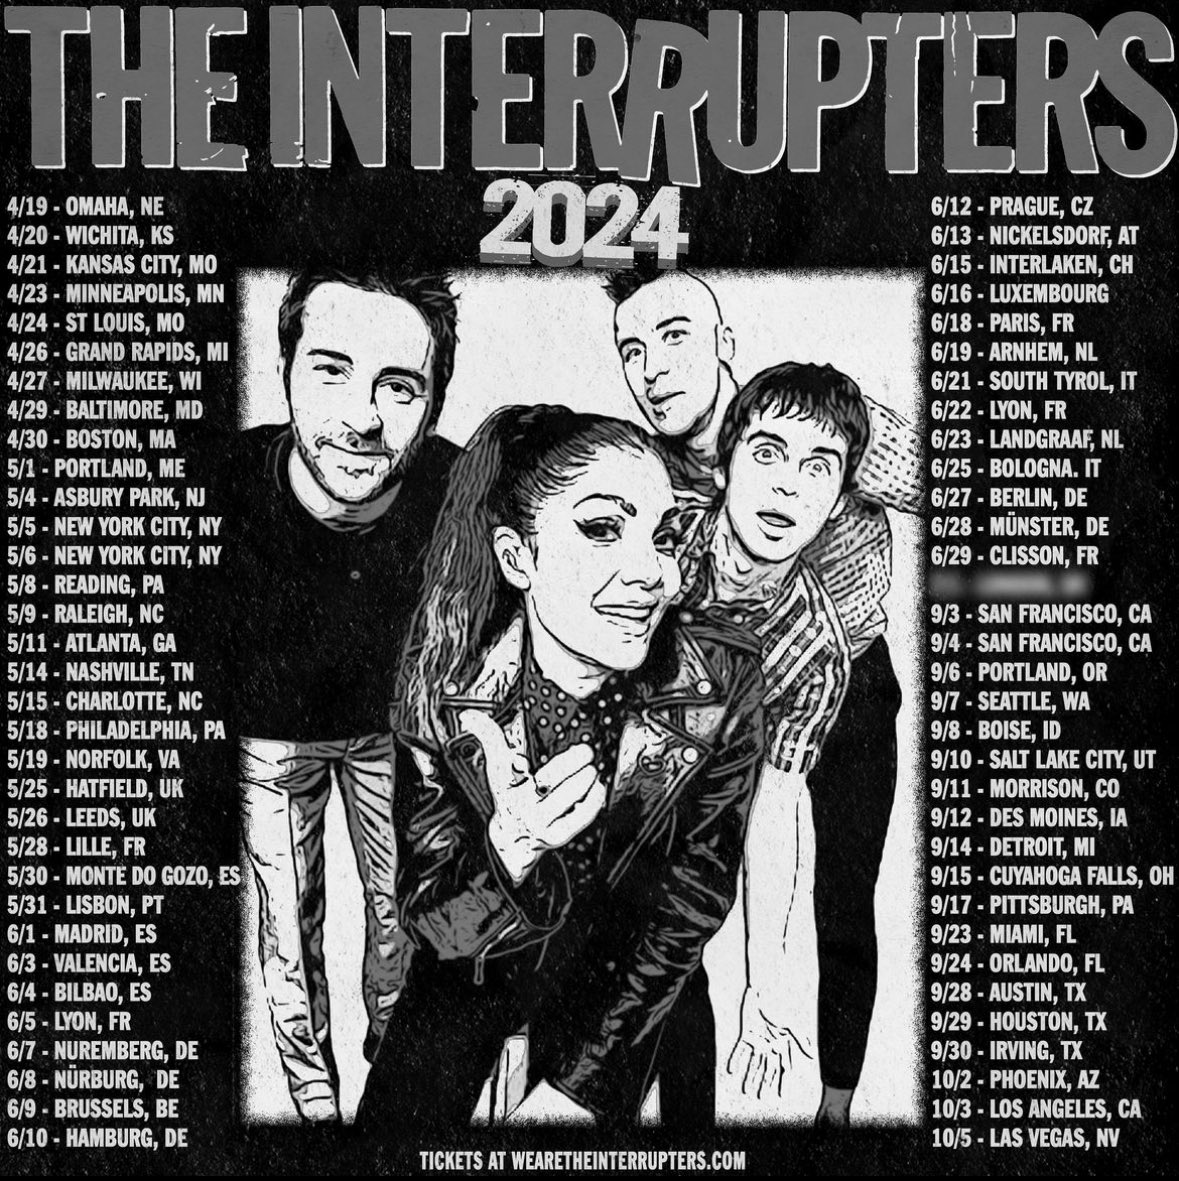 So excited to see your beautiful faces 🤩 Any song requests? 🎶 wearetheinterrupters.com/tour